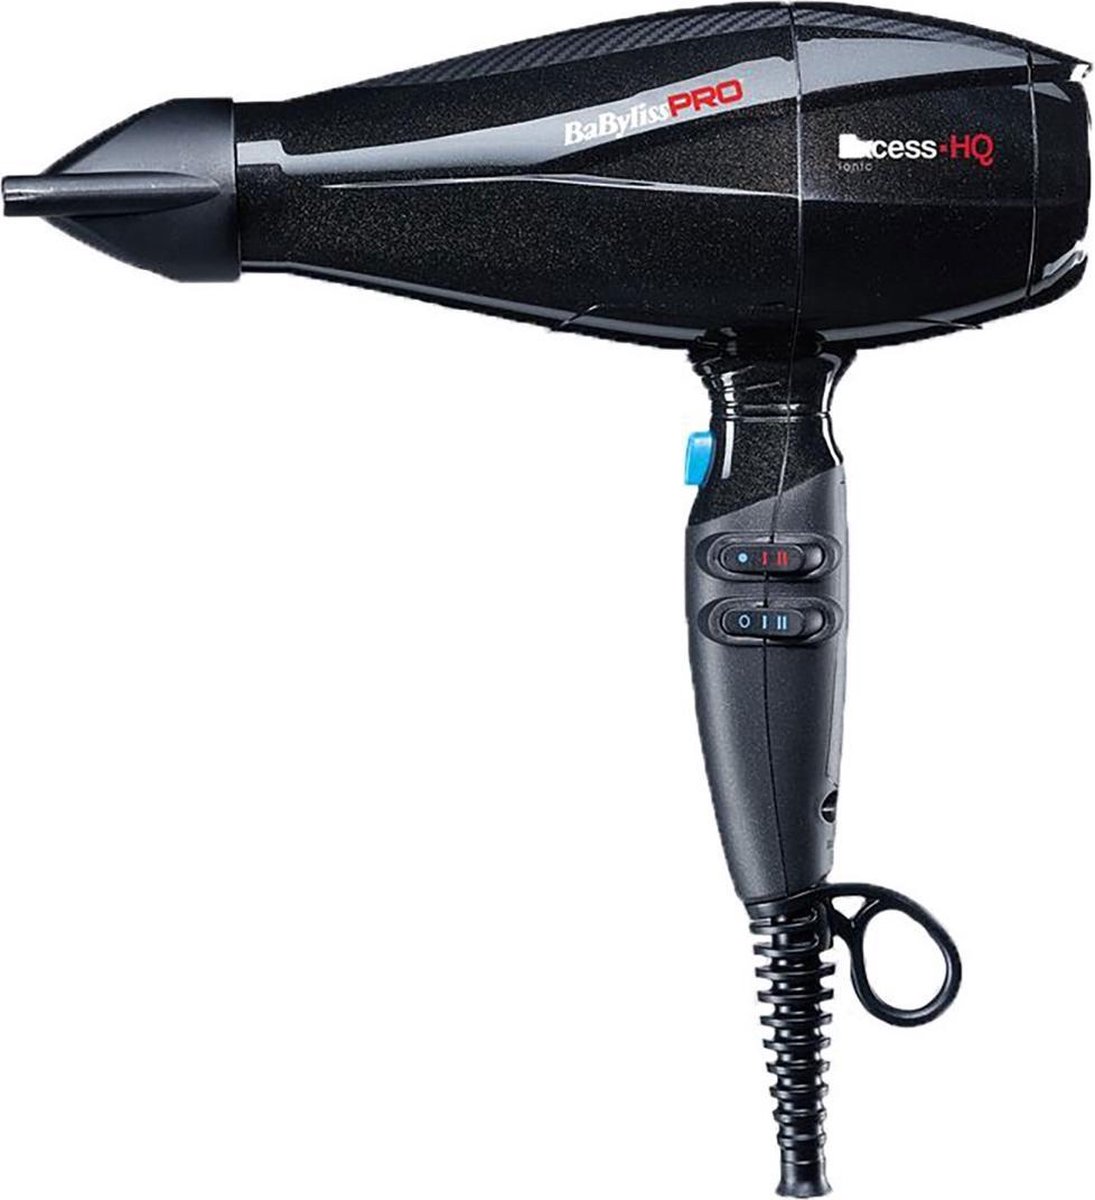 Babyliss - Pro Excess-HQ Hair Dryer 2600W